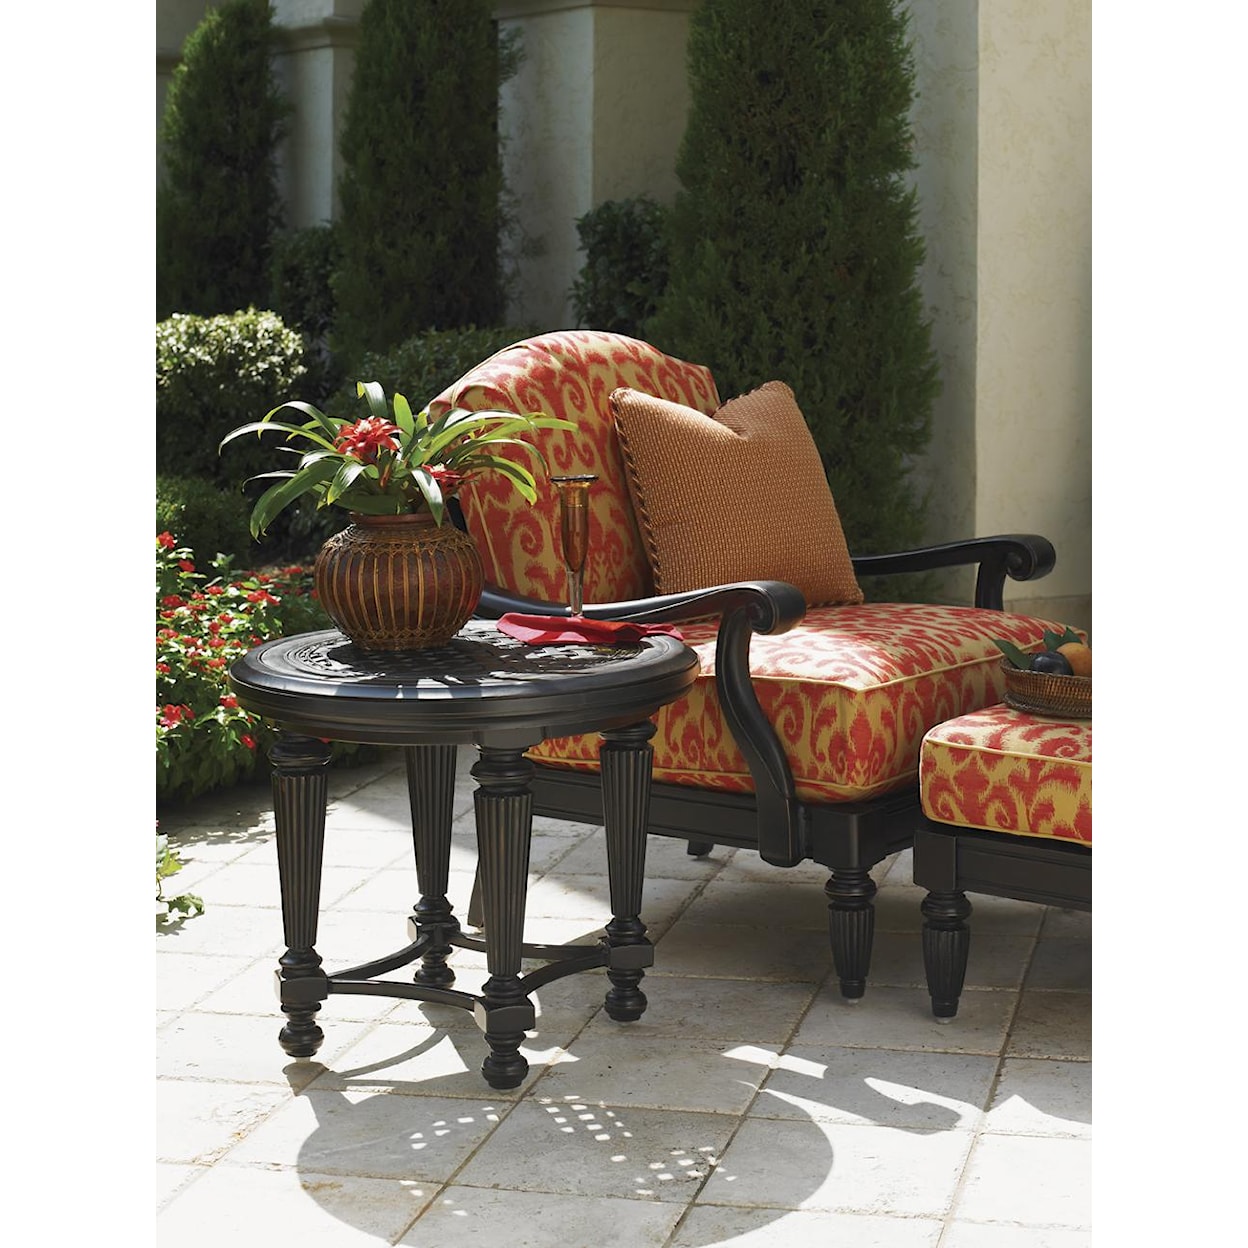 Tommy Bahama Outdoor Living Kingstown Sedona Round End Table